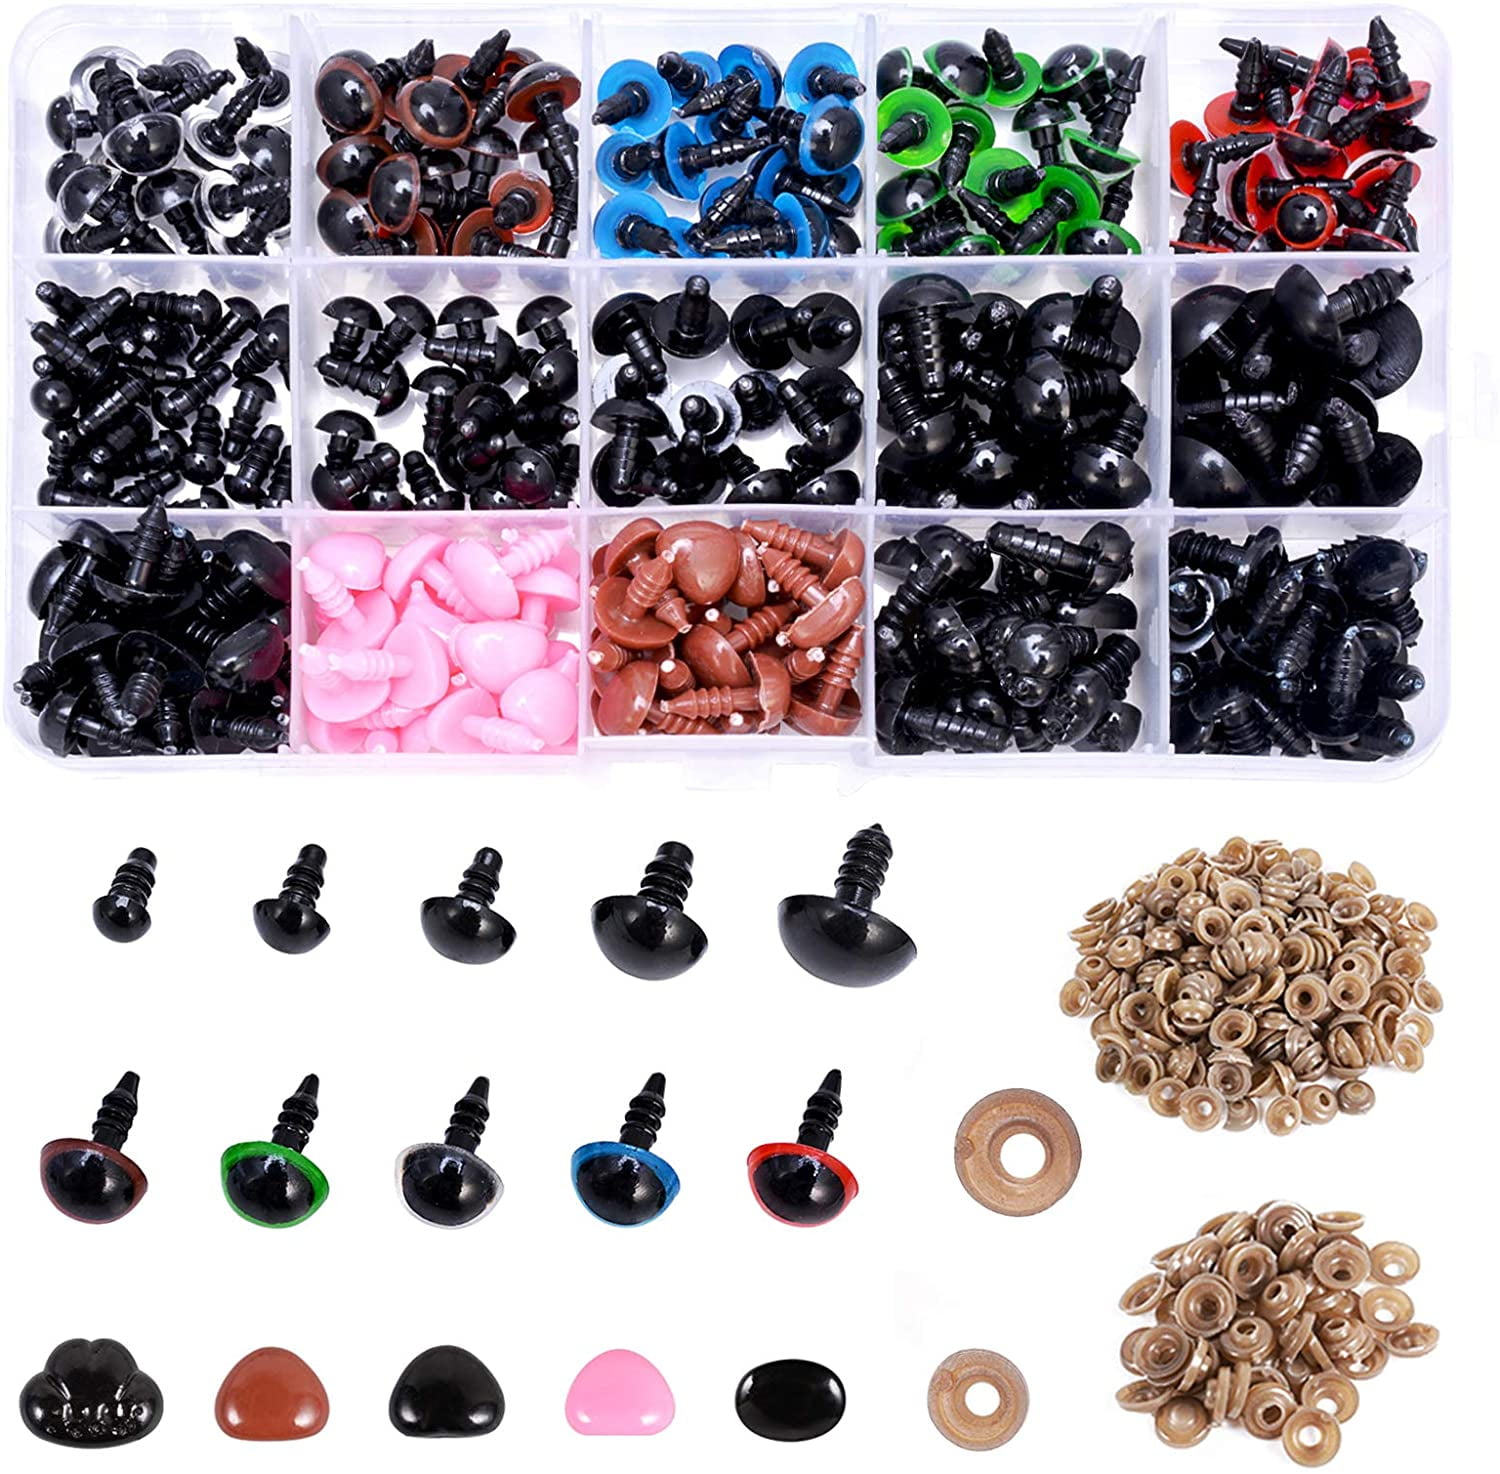 752pcs Safety Eyes and Safety Noses with Washers for Doll, Colorful Plastic  Safety Eyes and Noses Assorted Sizes for Doll, Plush Animal and Teddy Bear  Craft Making by AMOKIA